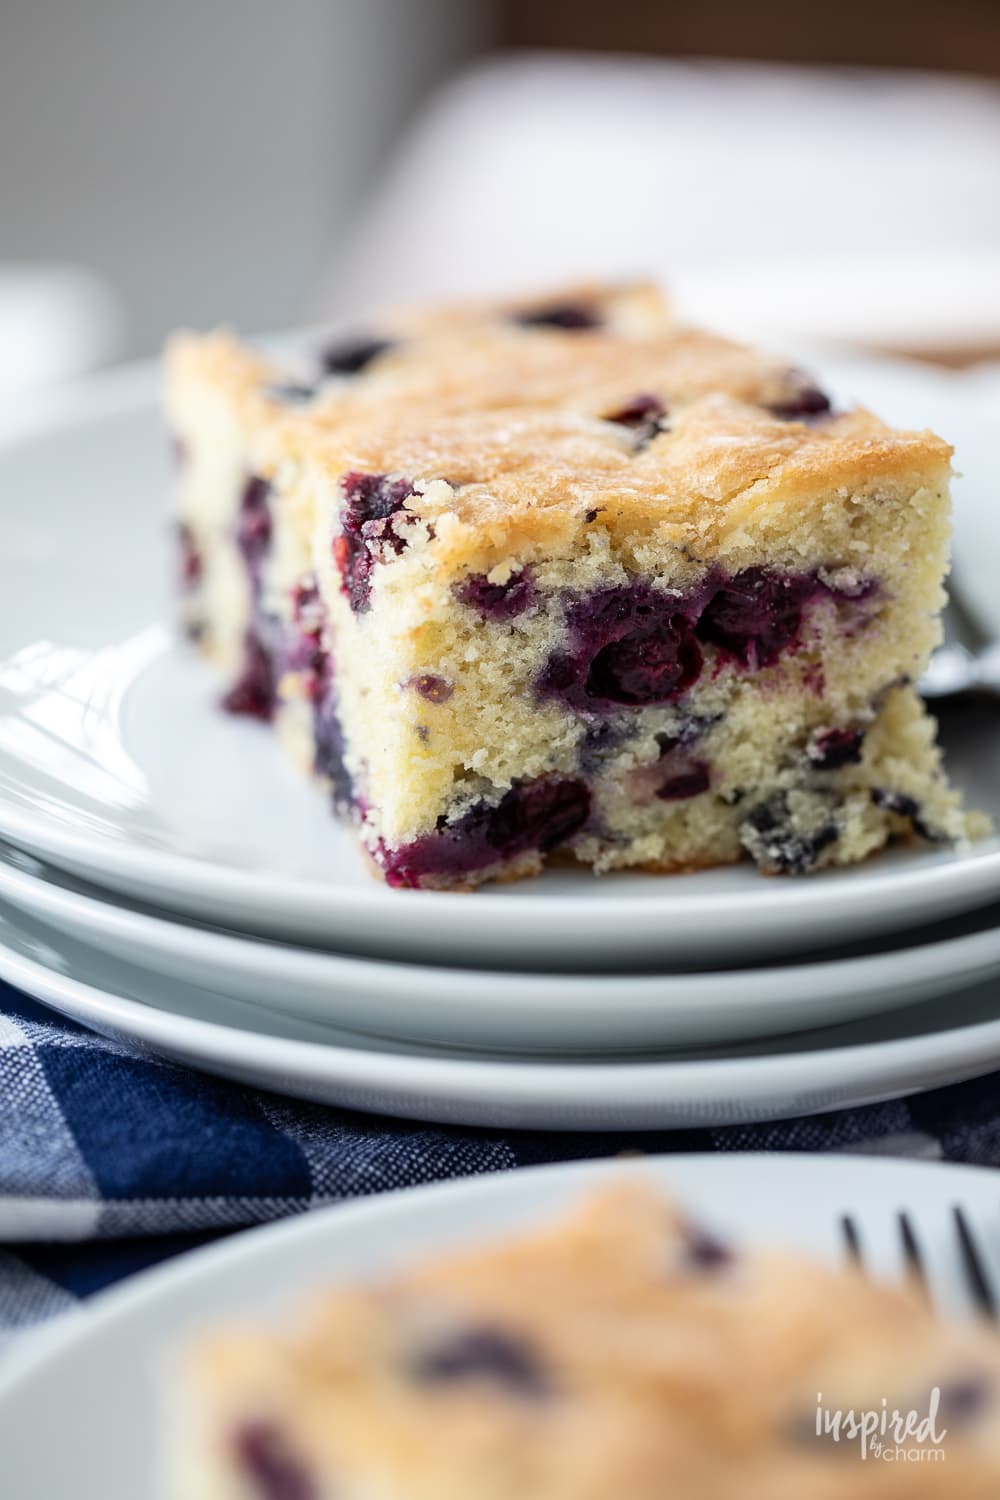 Easy and Delicious Homemade Blueberry Cake Recipe